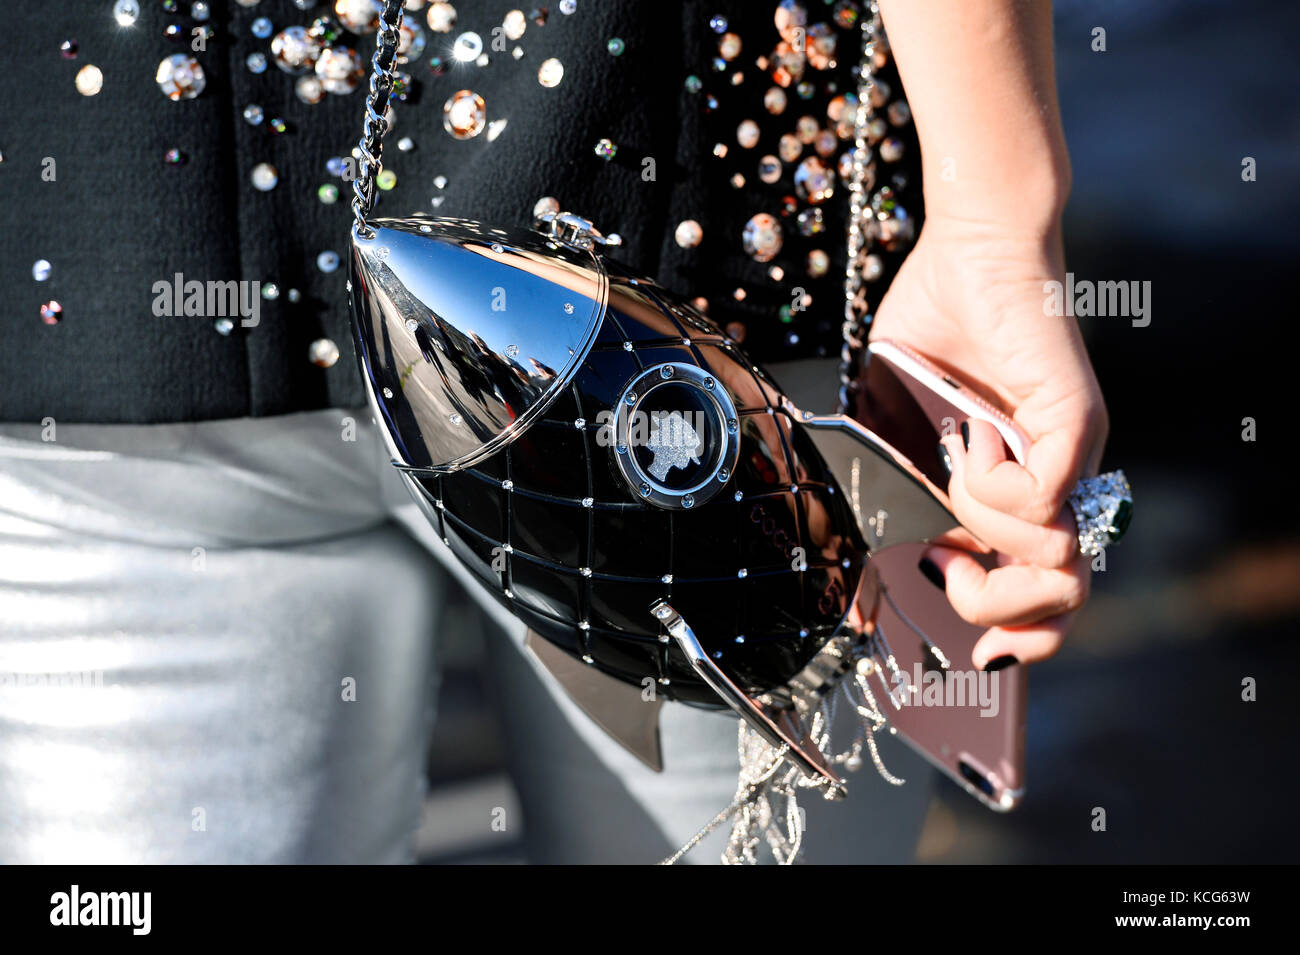 Chanel Rocket Bag High Resolution Stock Photography and Images - Alamy